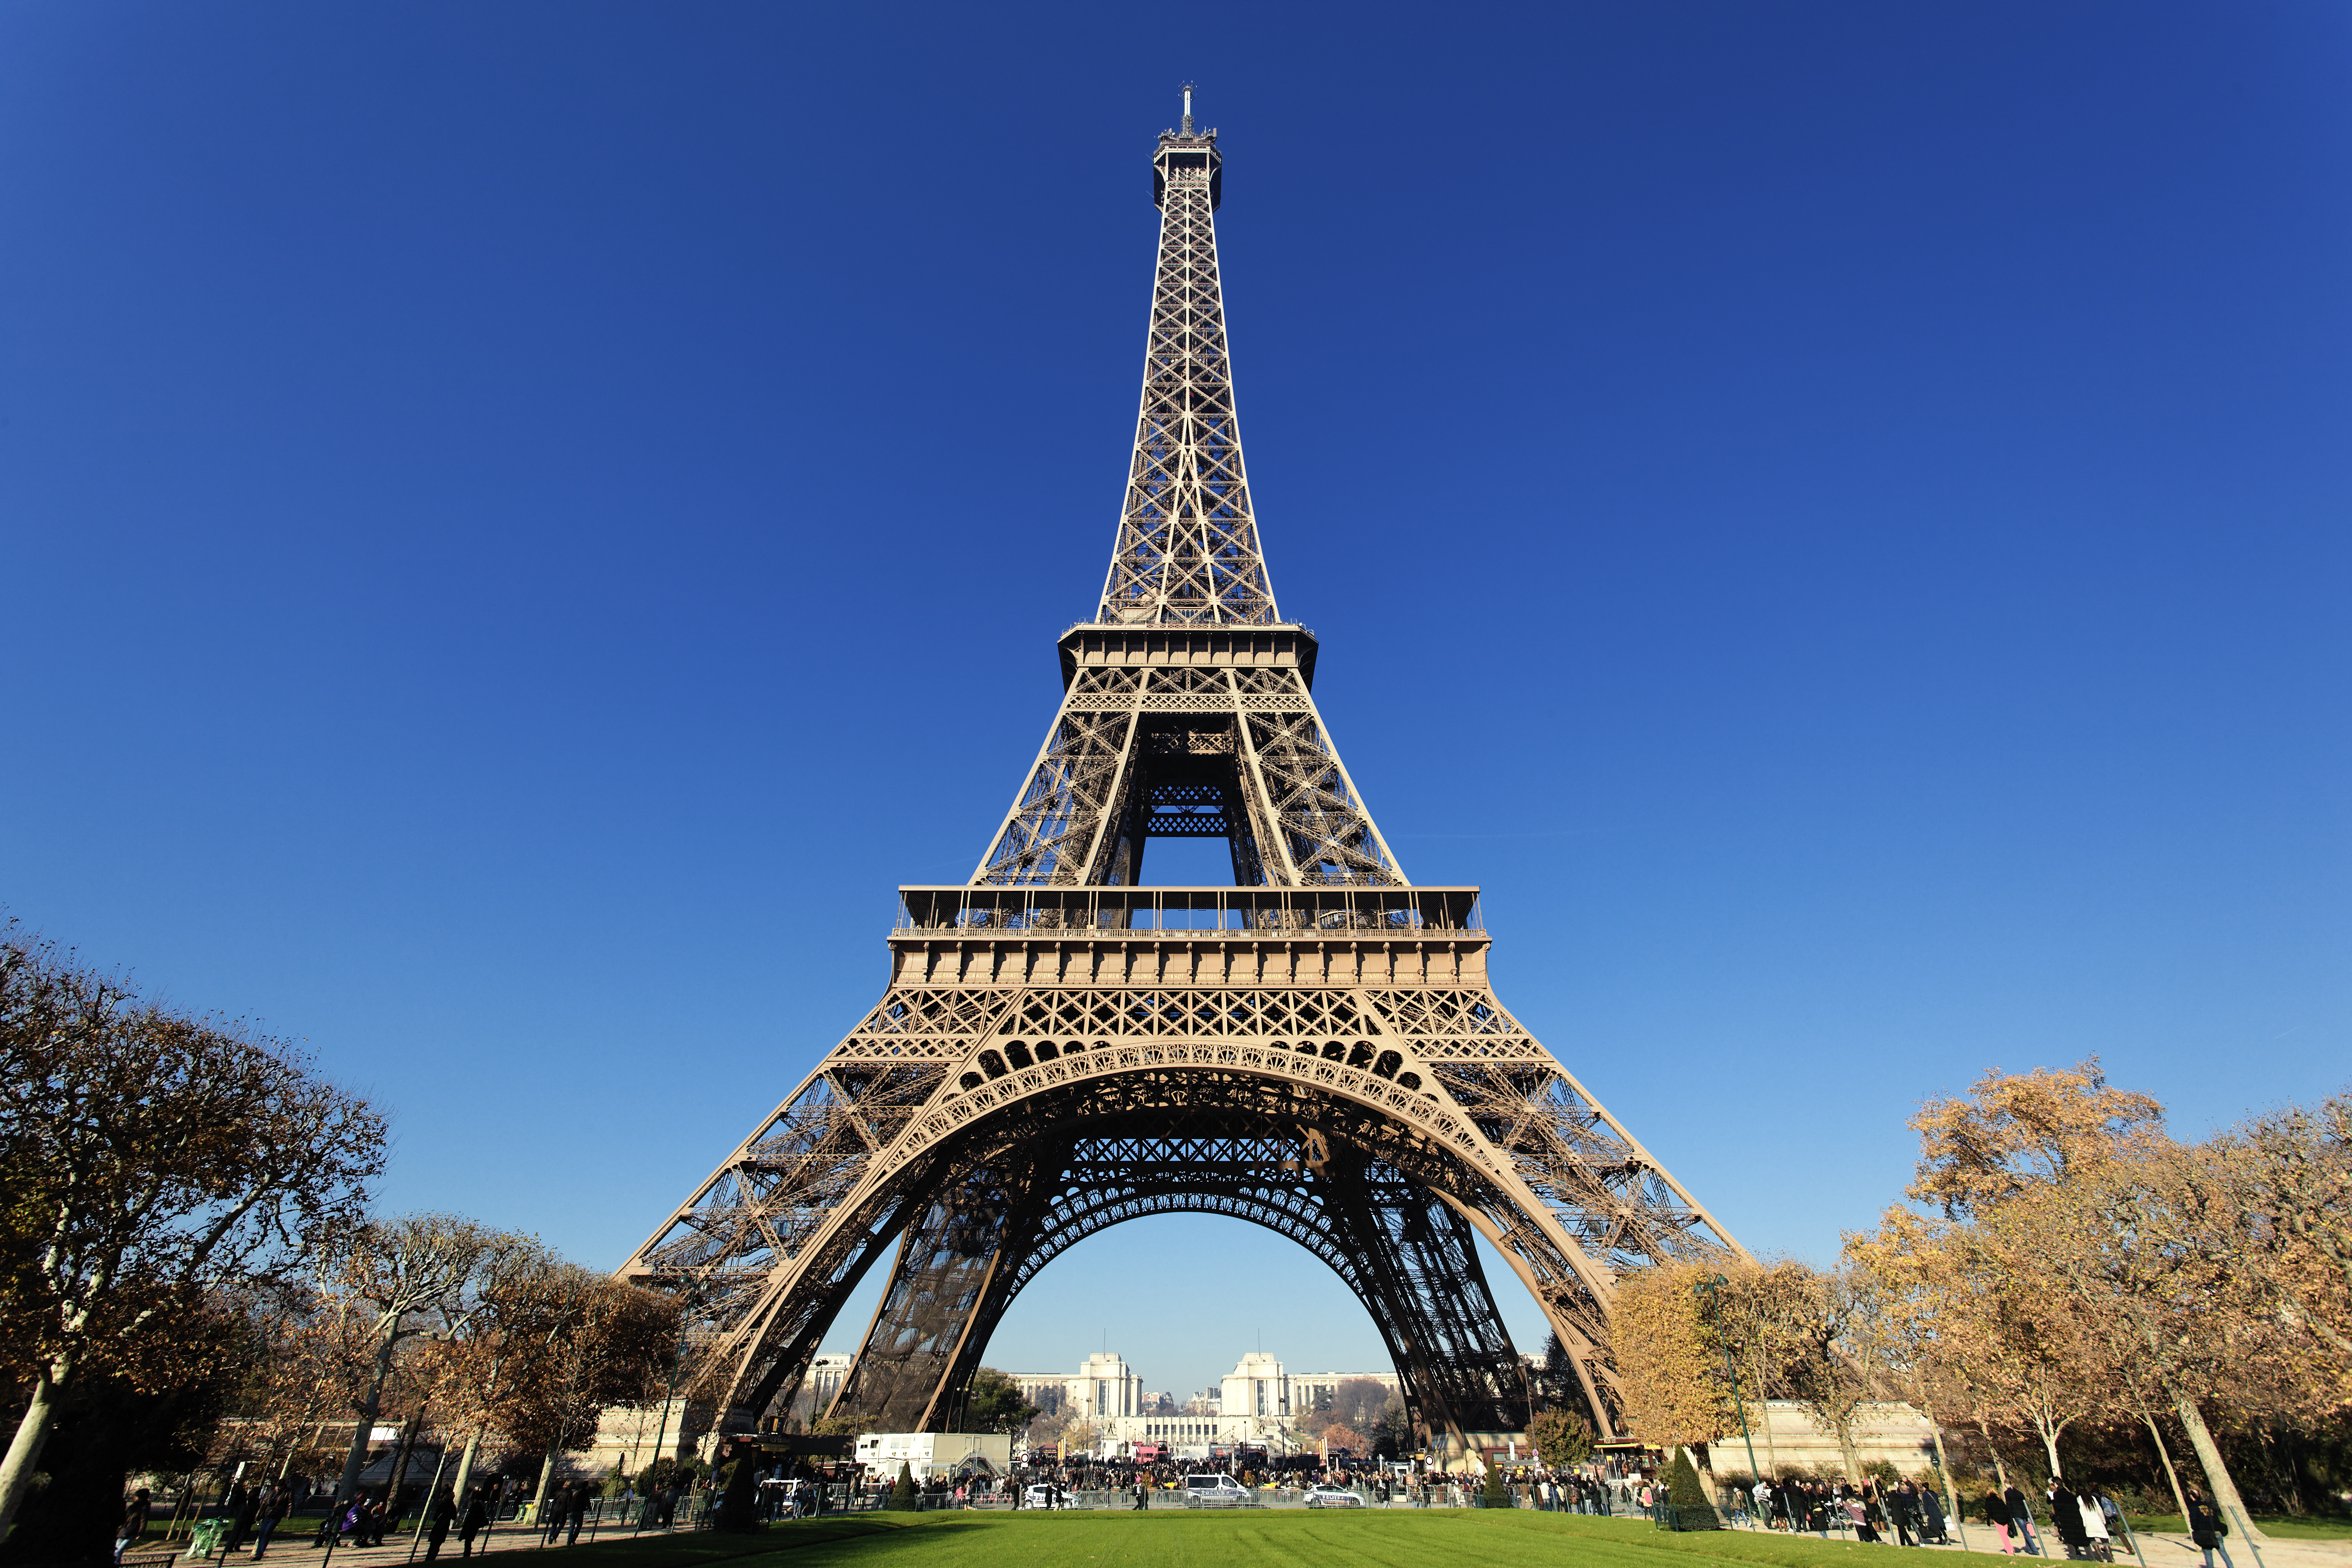 From the Eiffel Tower to the Louvre: An Unforgettable Itinerary of Paris, France